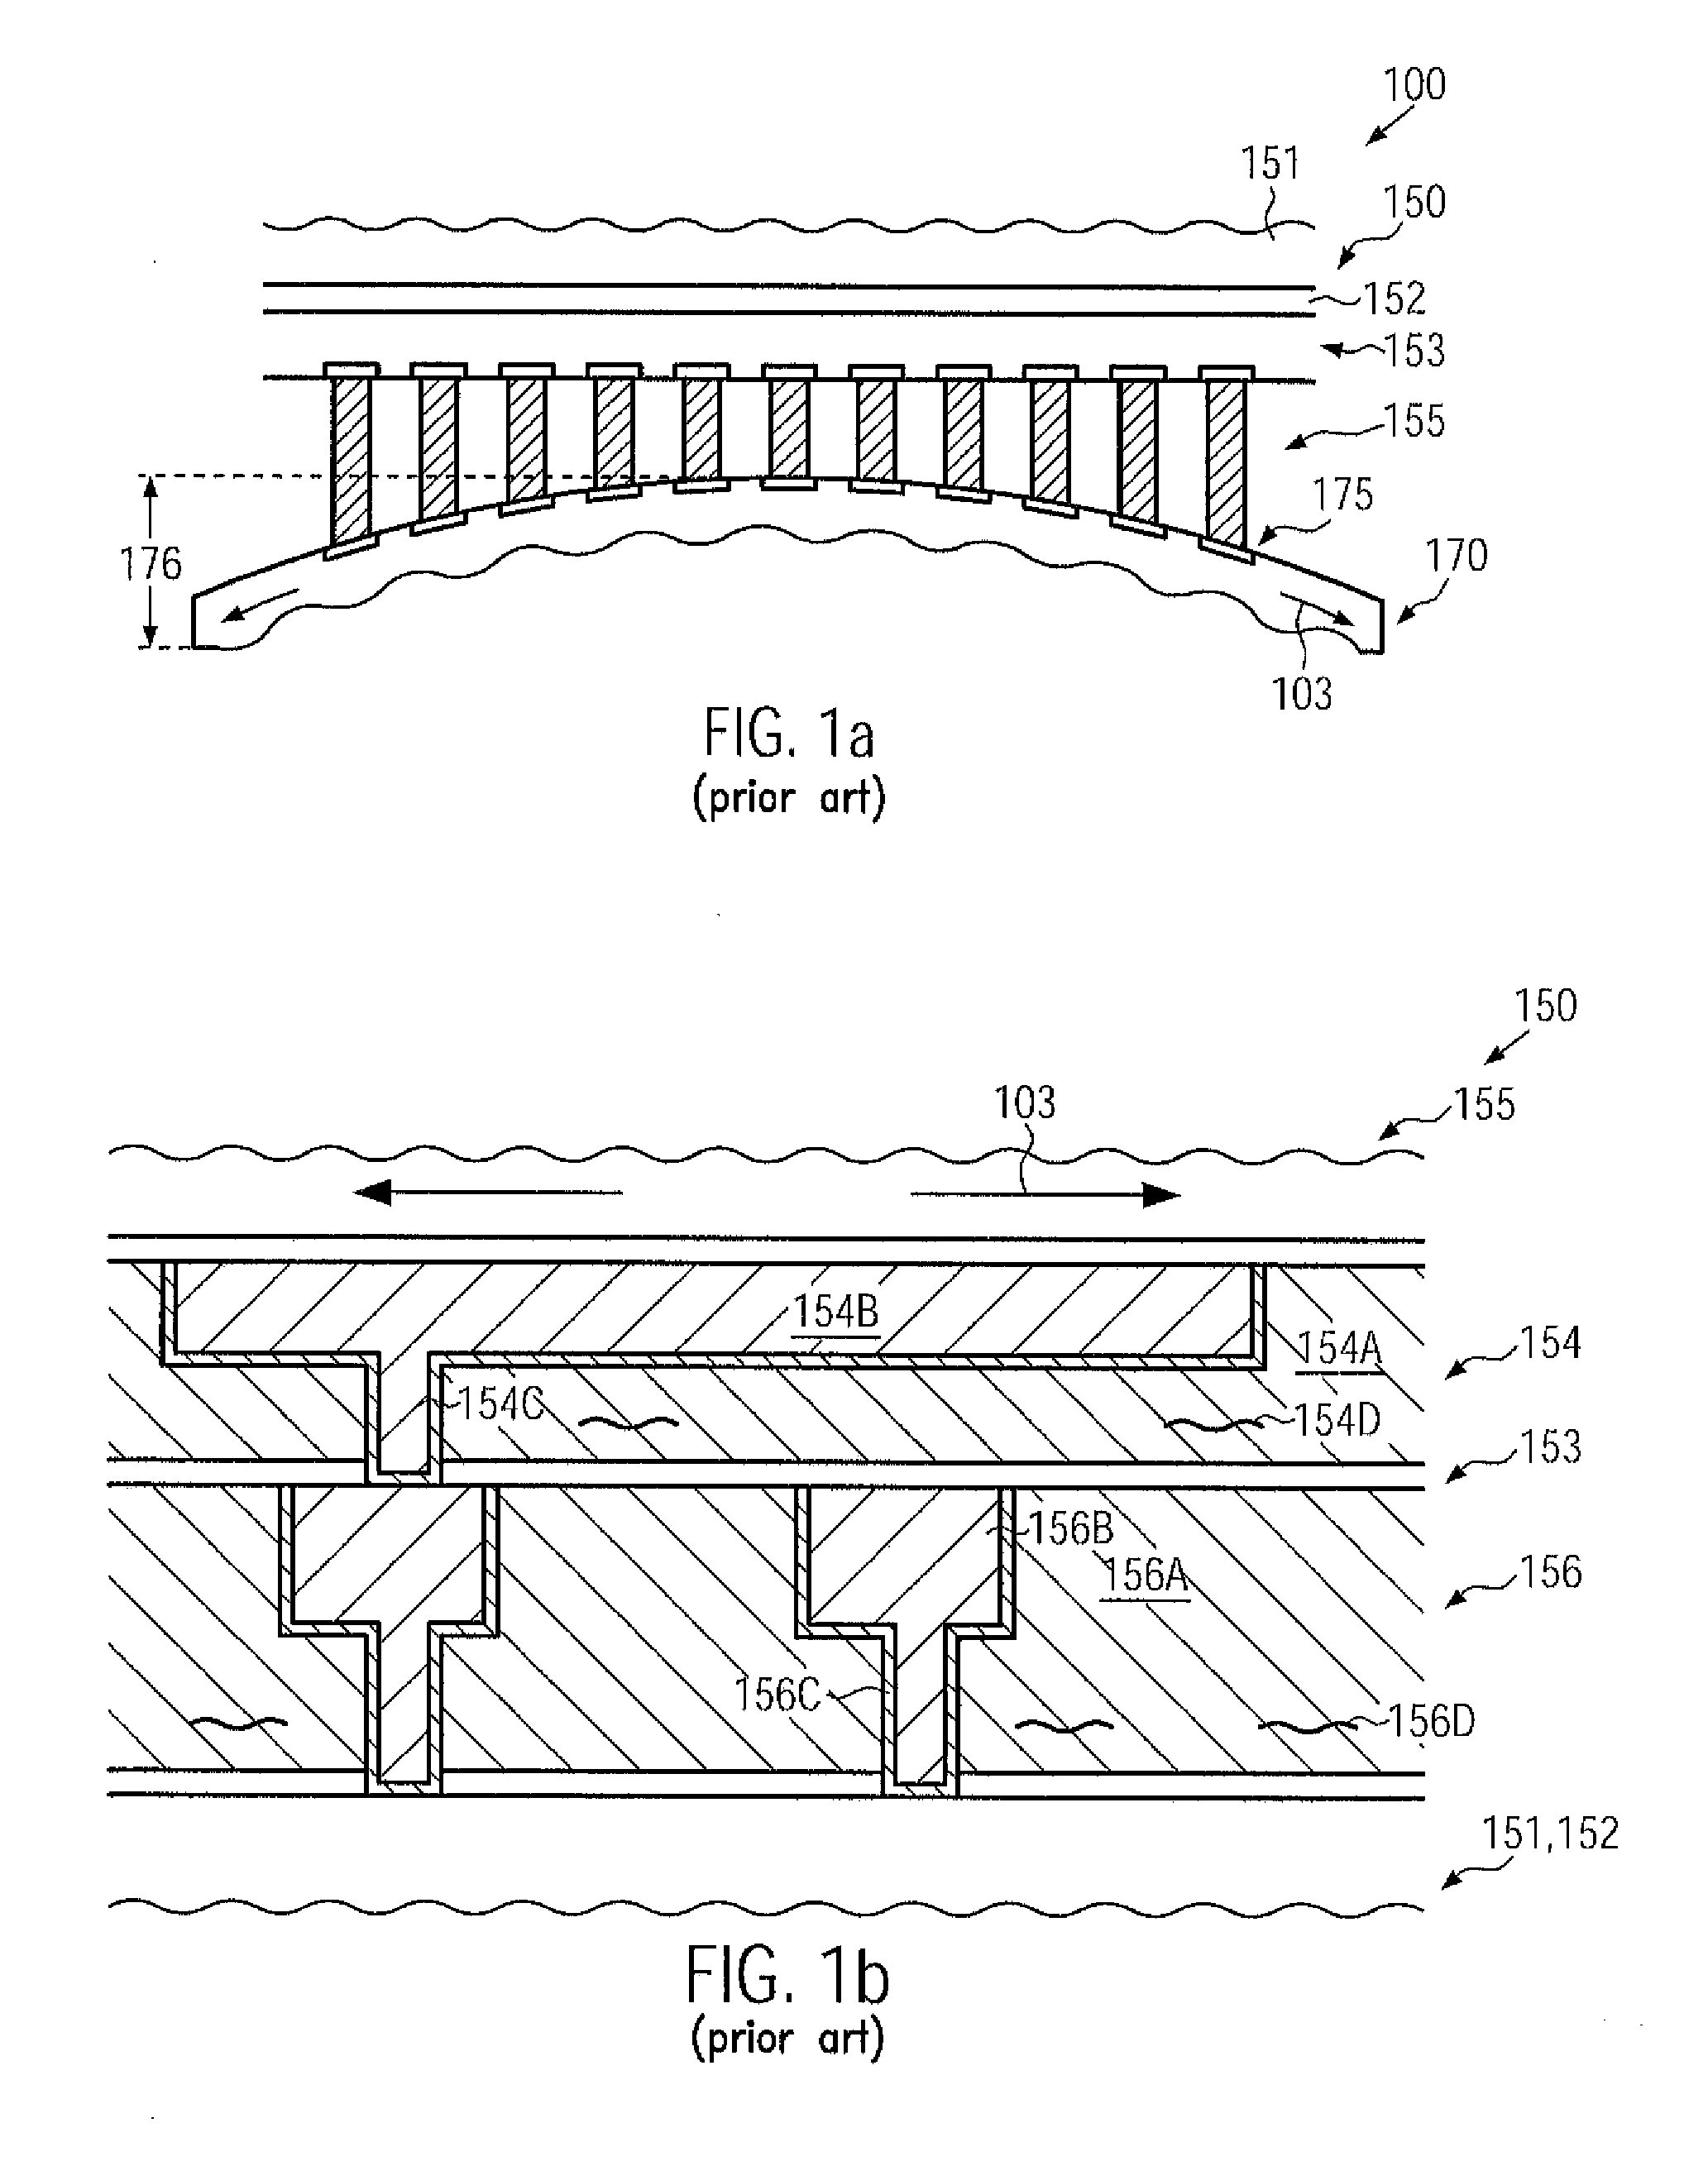 Chip Package Including Multiple Sections for Reducing Chip Package Interaction